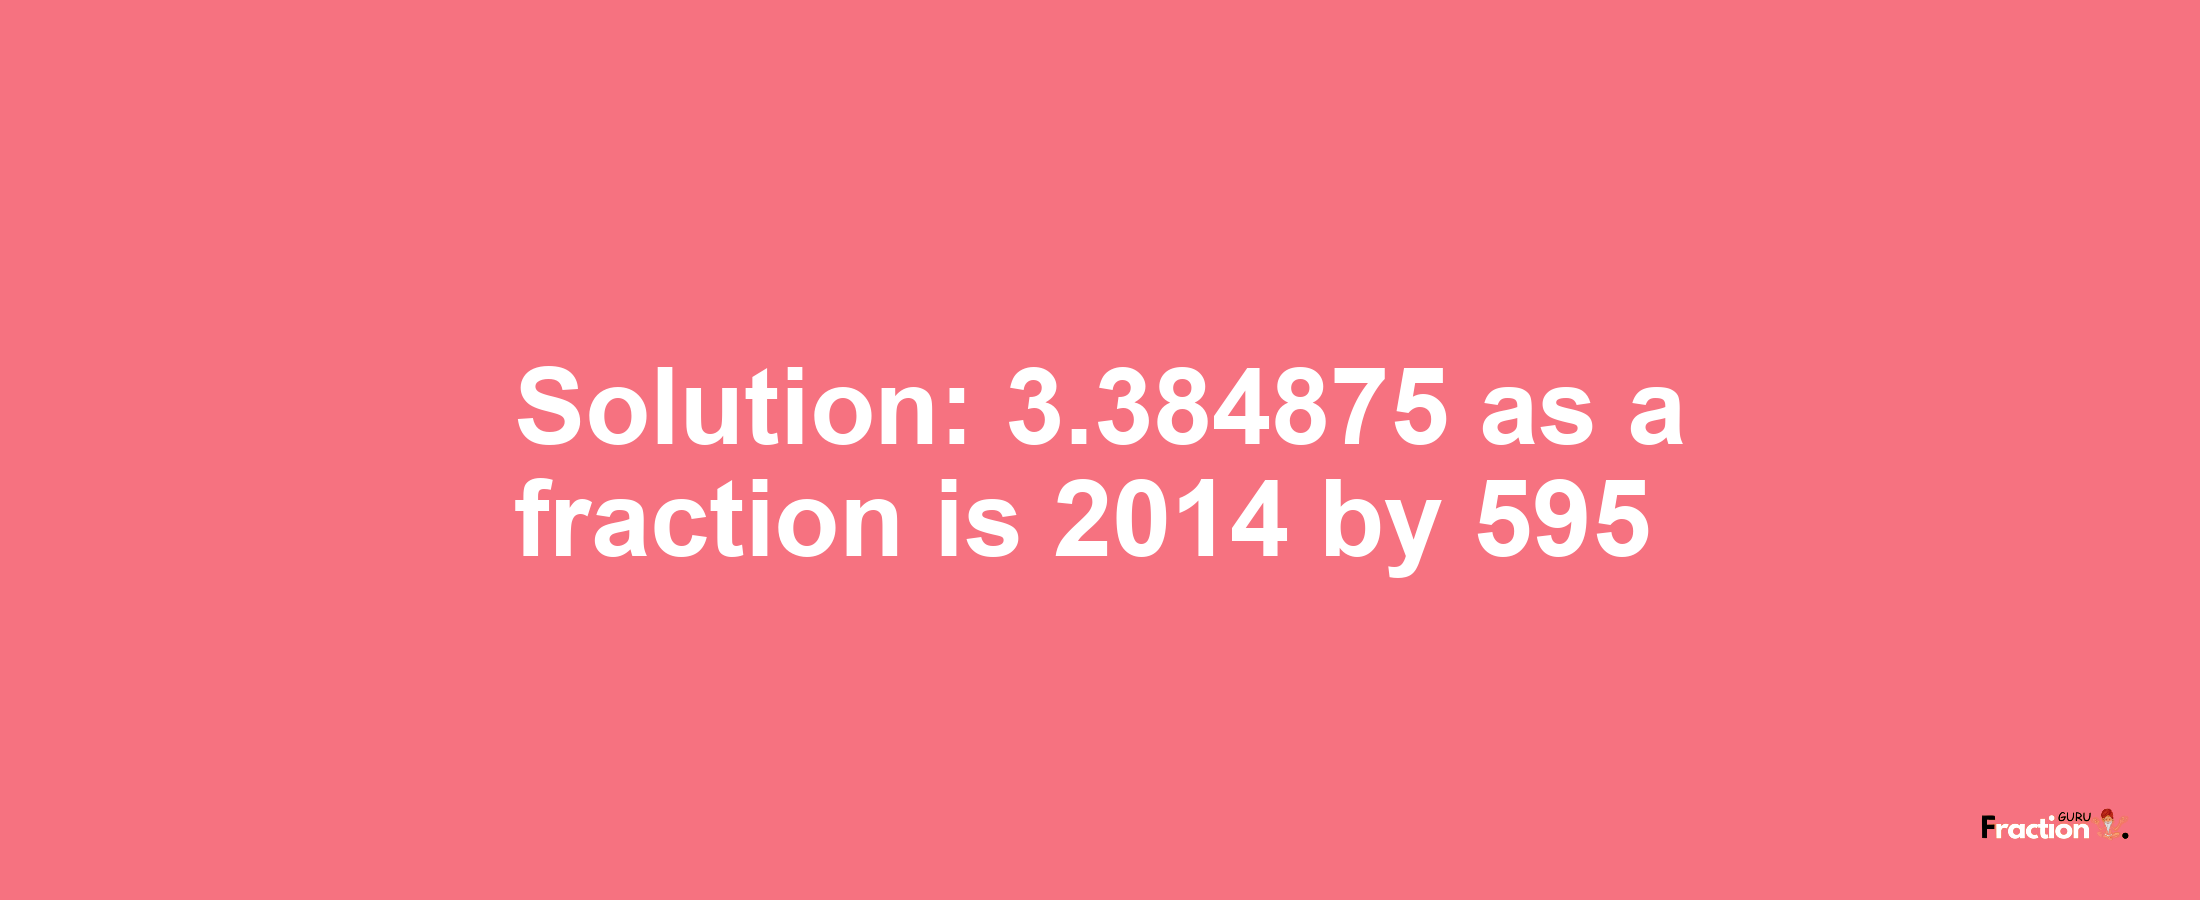 Solution:3.384875 as a fraction is 2014/595